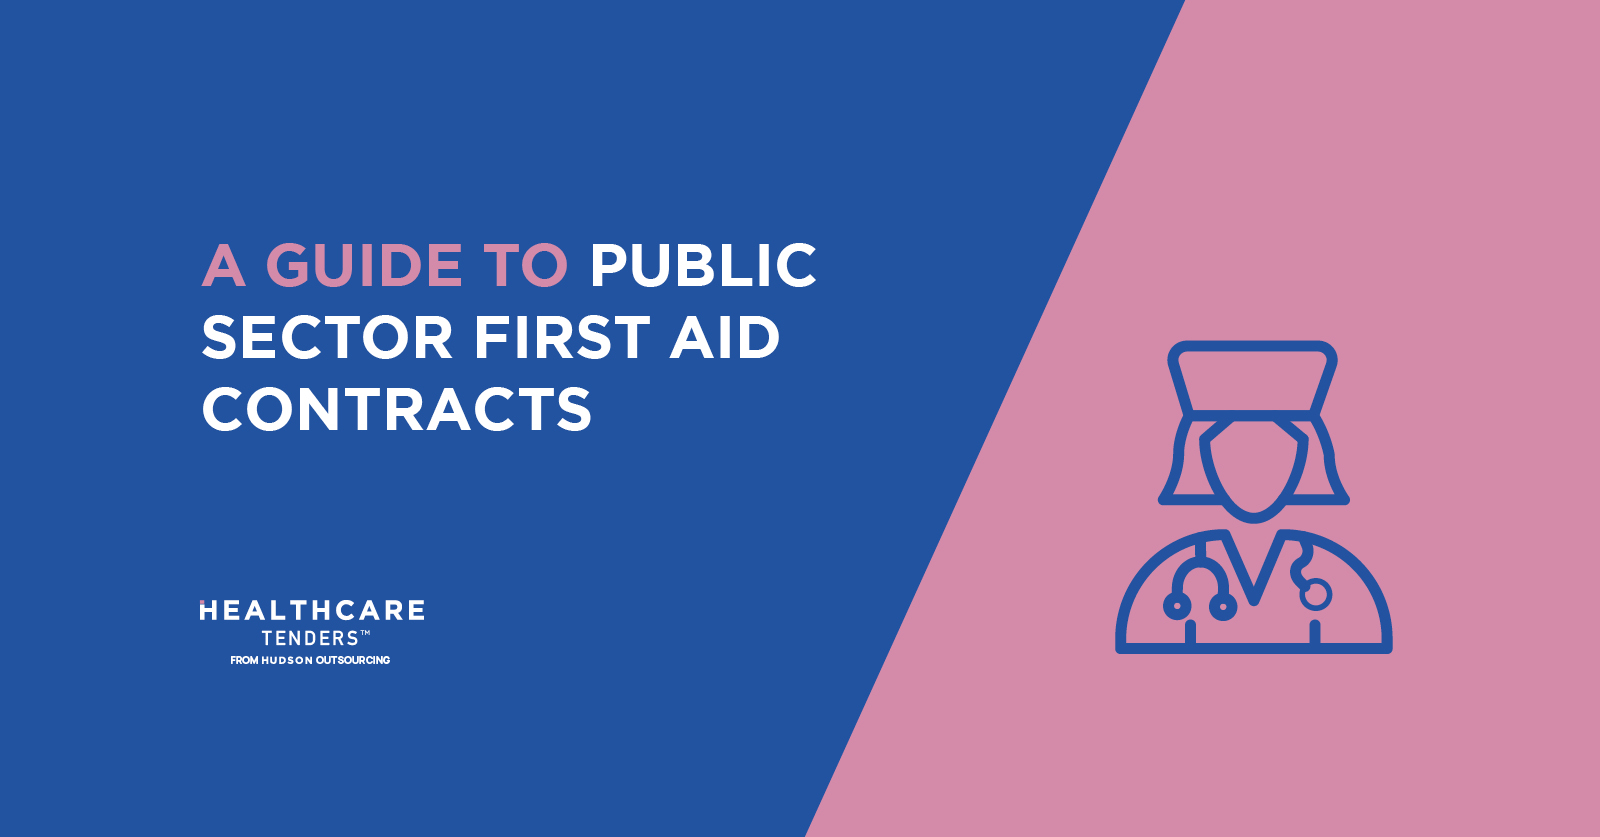 First Aid Tenders – A Guide to Public Sector First Aid Contracts